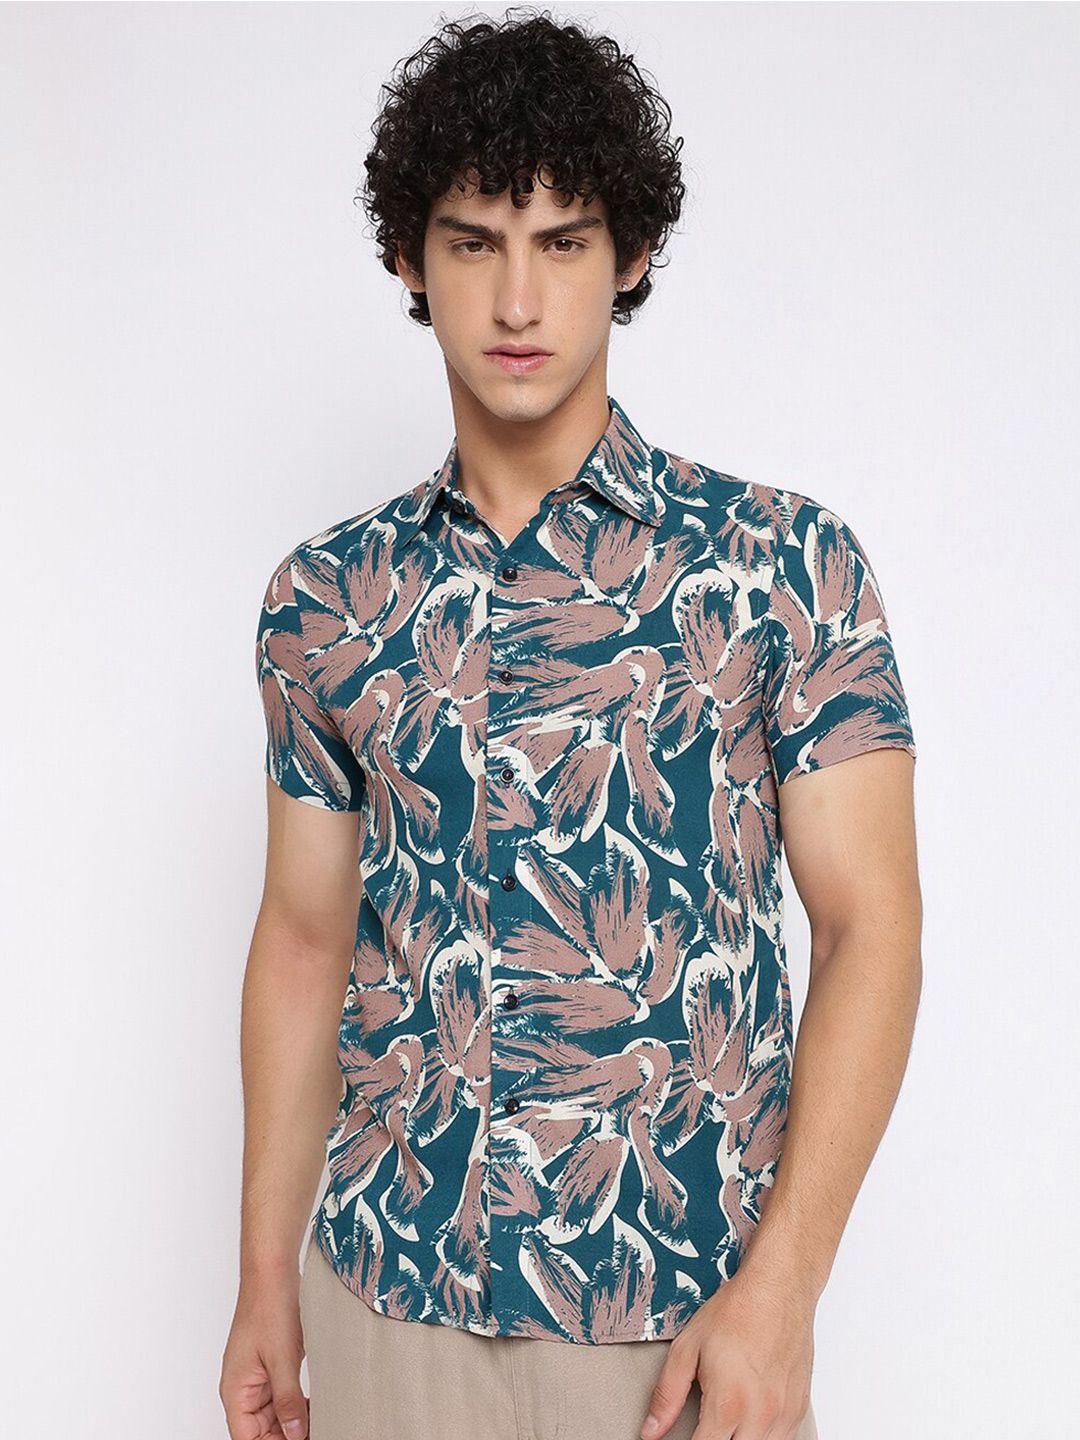 shurtz-n-skurtz-abstract-printed-relaxed-fit-cotton-casual-shirt